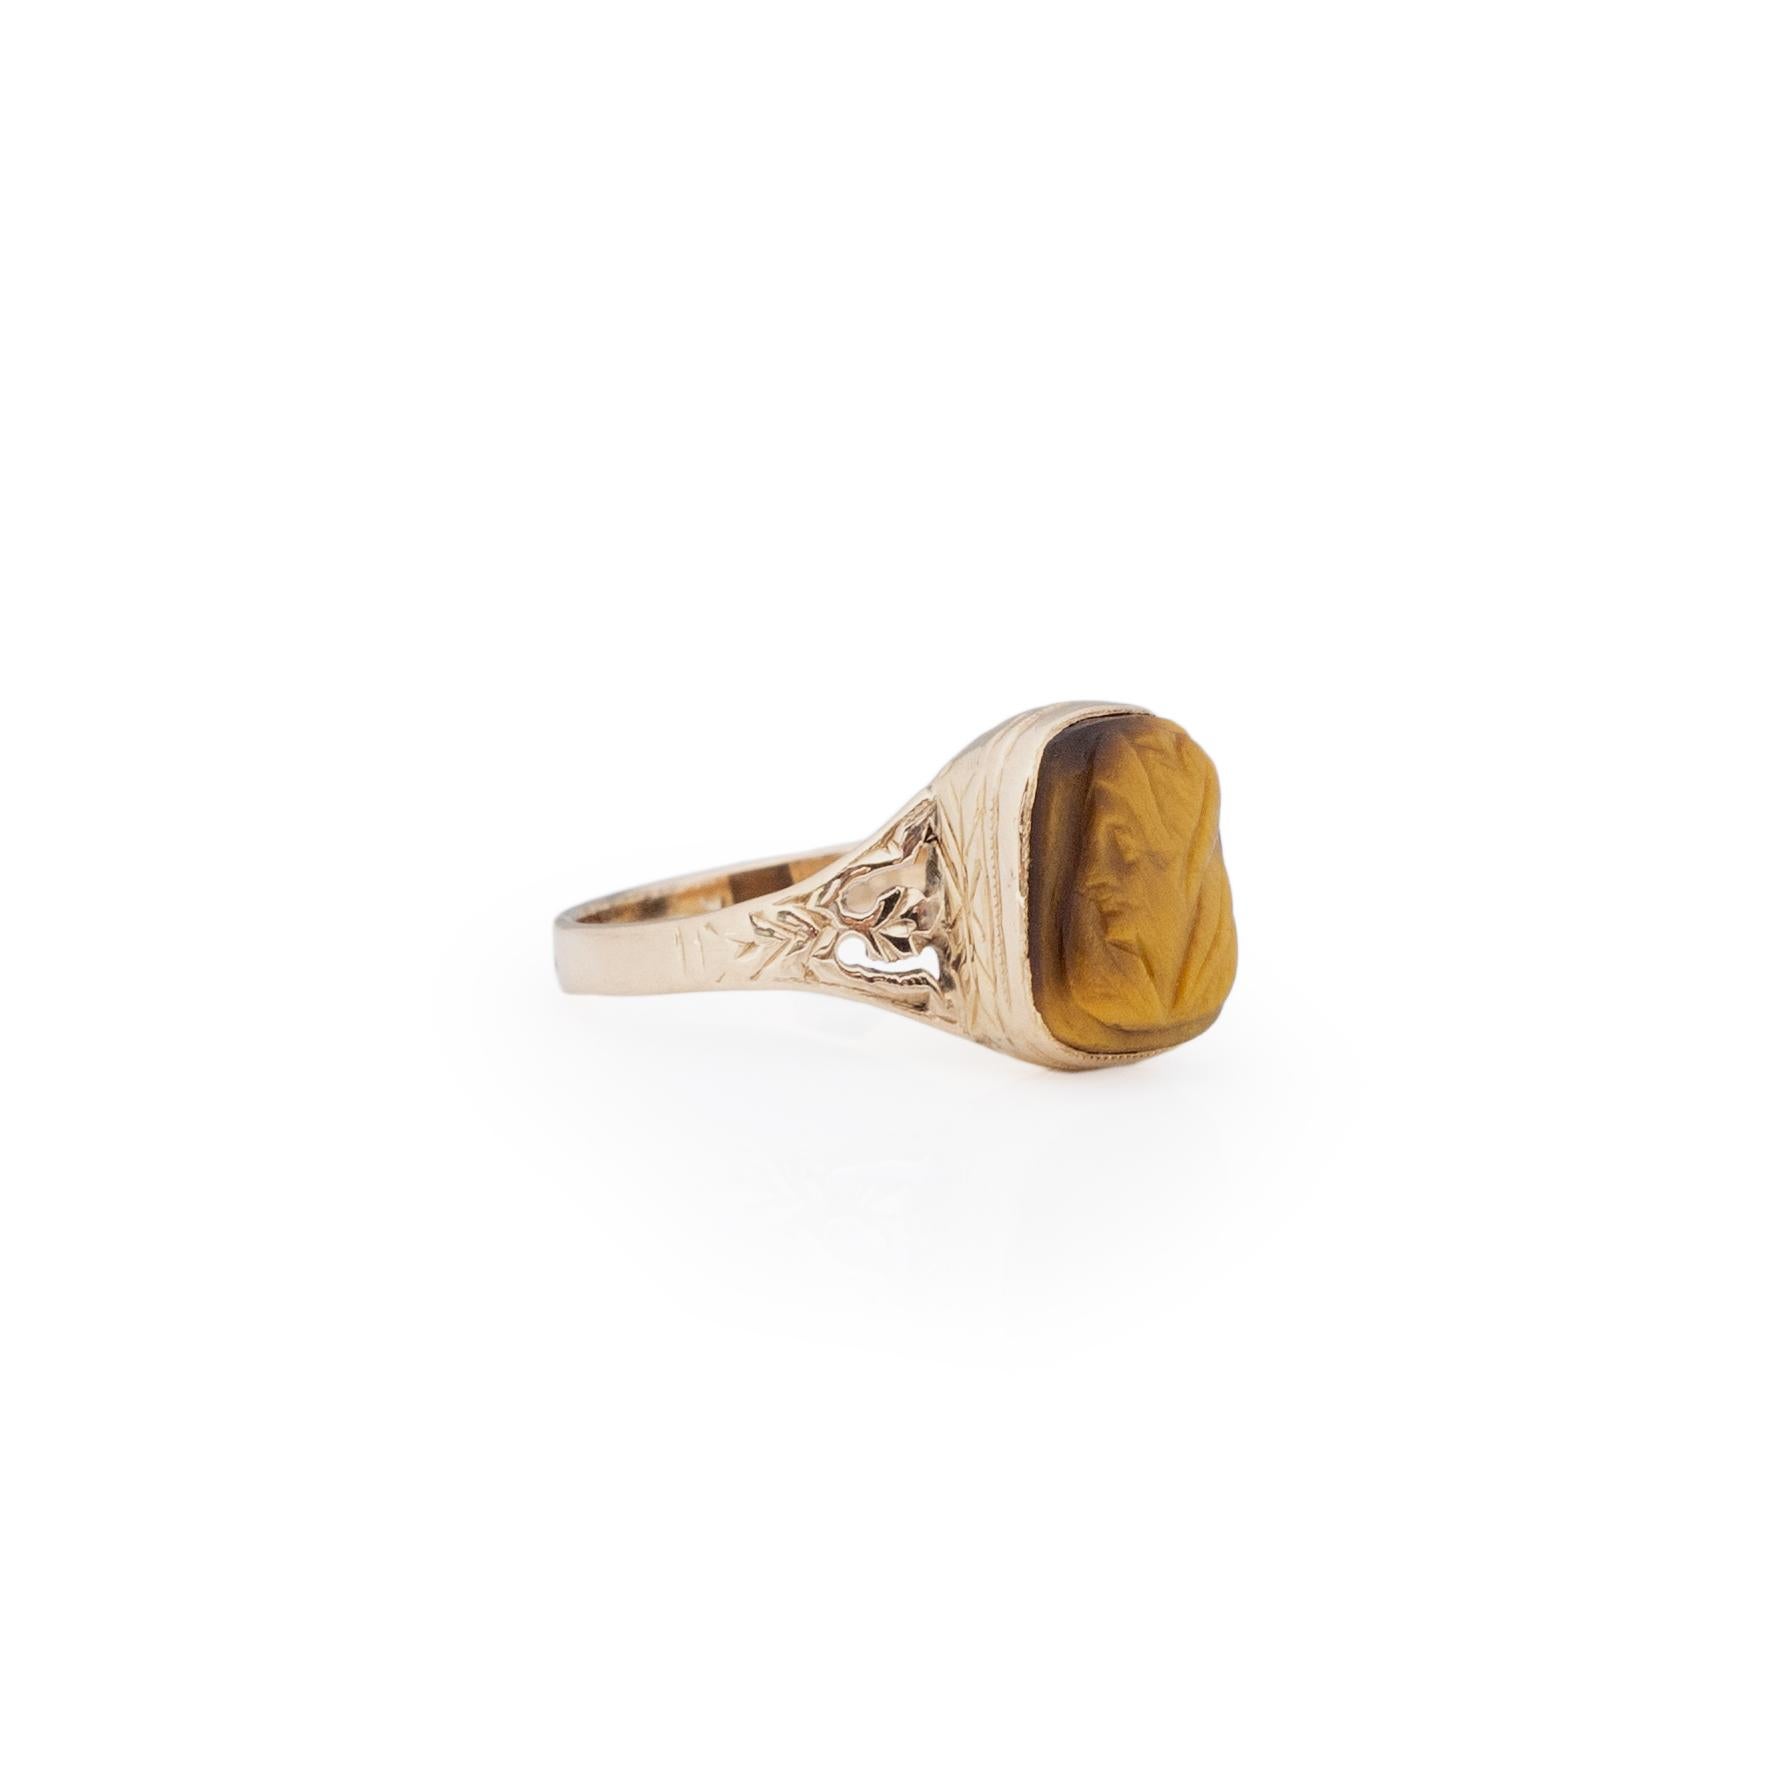 This Victorian treasure is a unique find. The 9K hand carved split shank design holds a beautiful rectangle tigers eye. On the tigers eye is a delicately carved cameo. This a figure has feminine characteristics, a true work of art. This piece is one